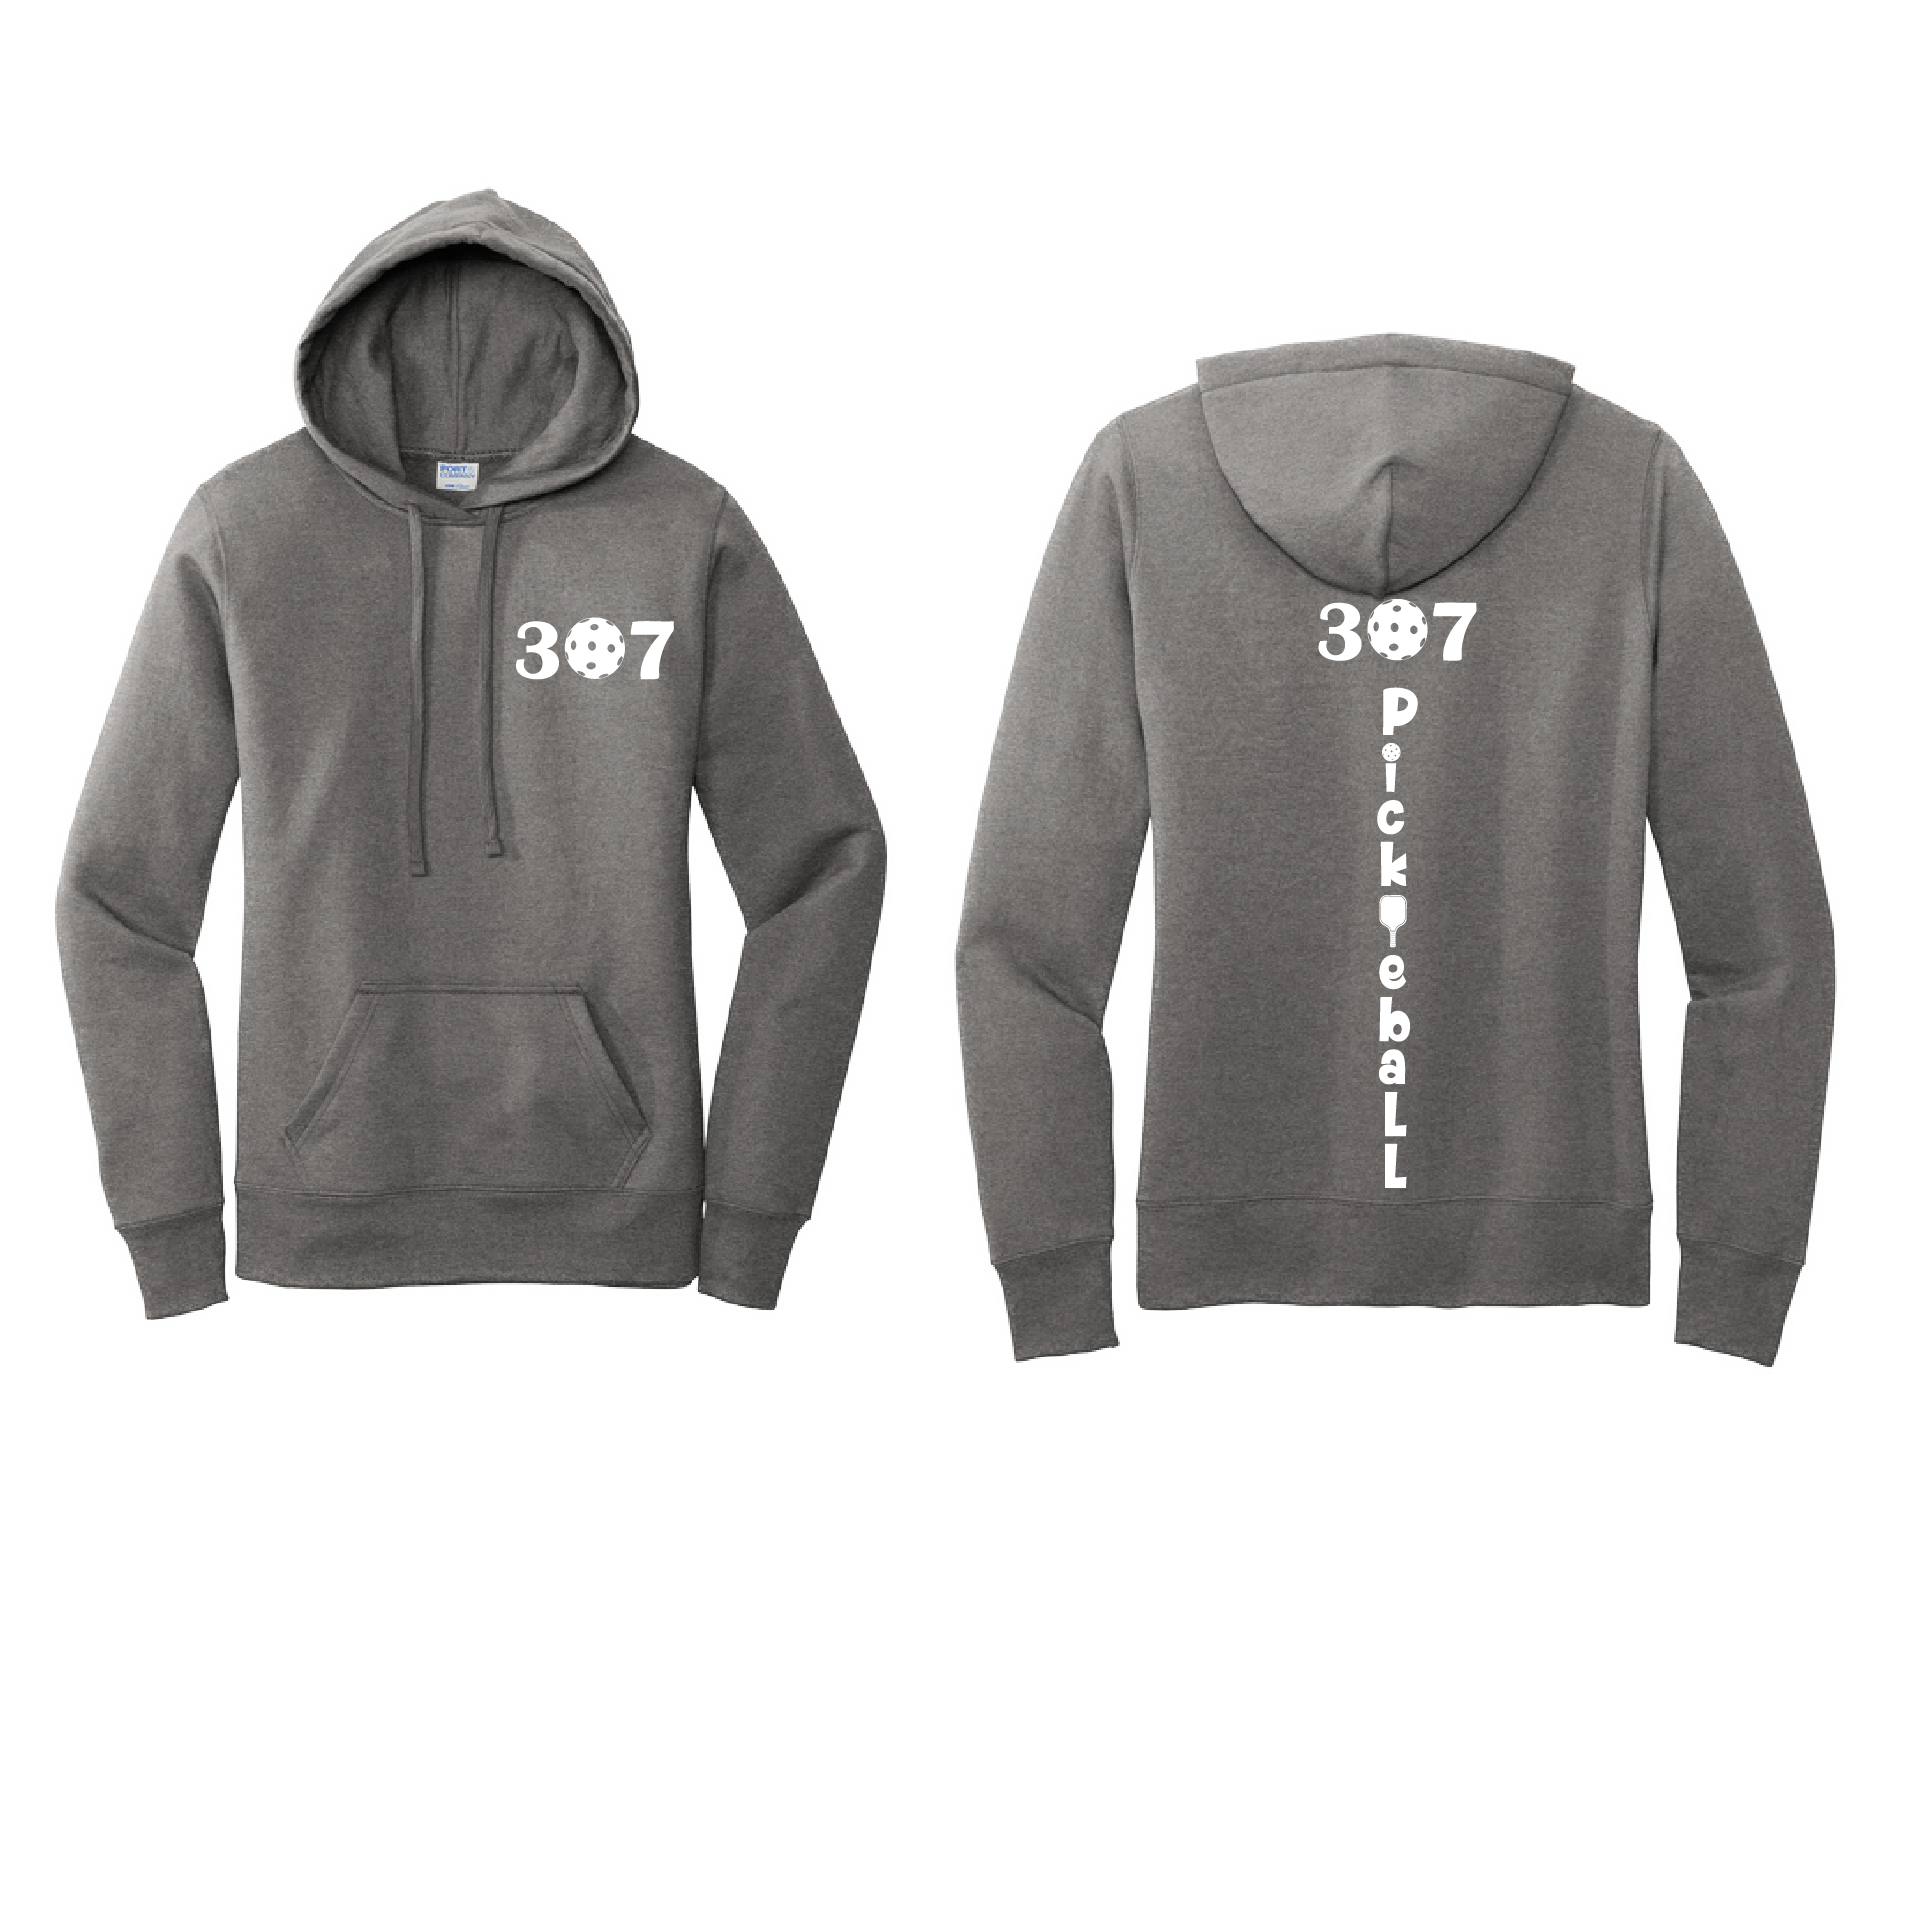 Design: 307 Wyoming Pickleball Club  Women's Hooded pullover Sweatshirt  Turn up the volume in this Women's Sweatshirts with its perfect mix of softness and attitude. Ultra soft lined inside with a lined hood also. This is fitted nicely for a women's figure. Front pouch pocket.